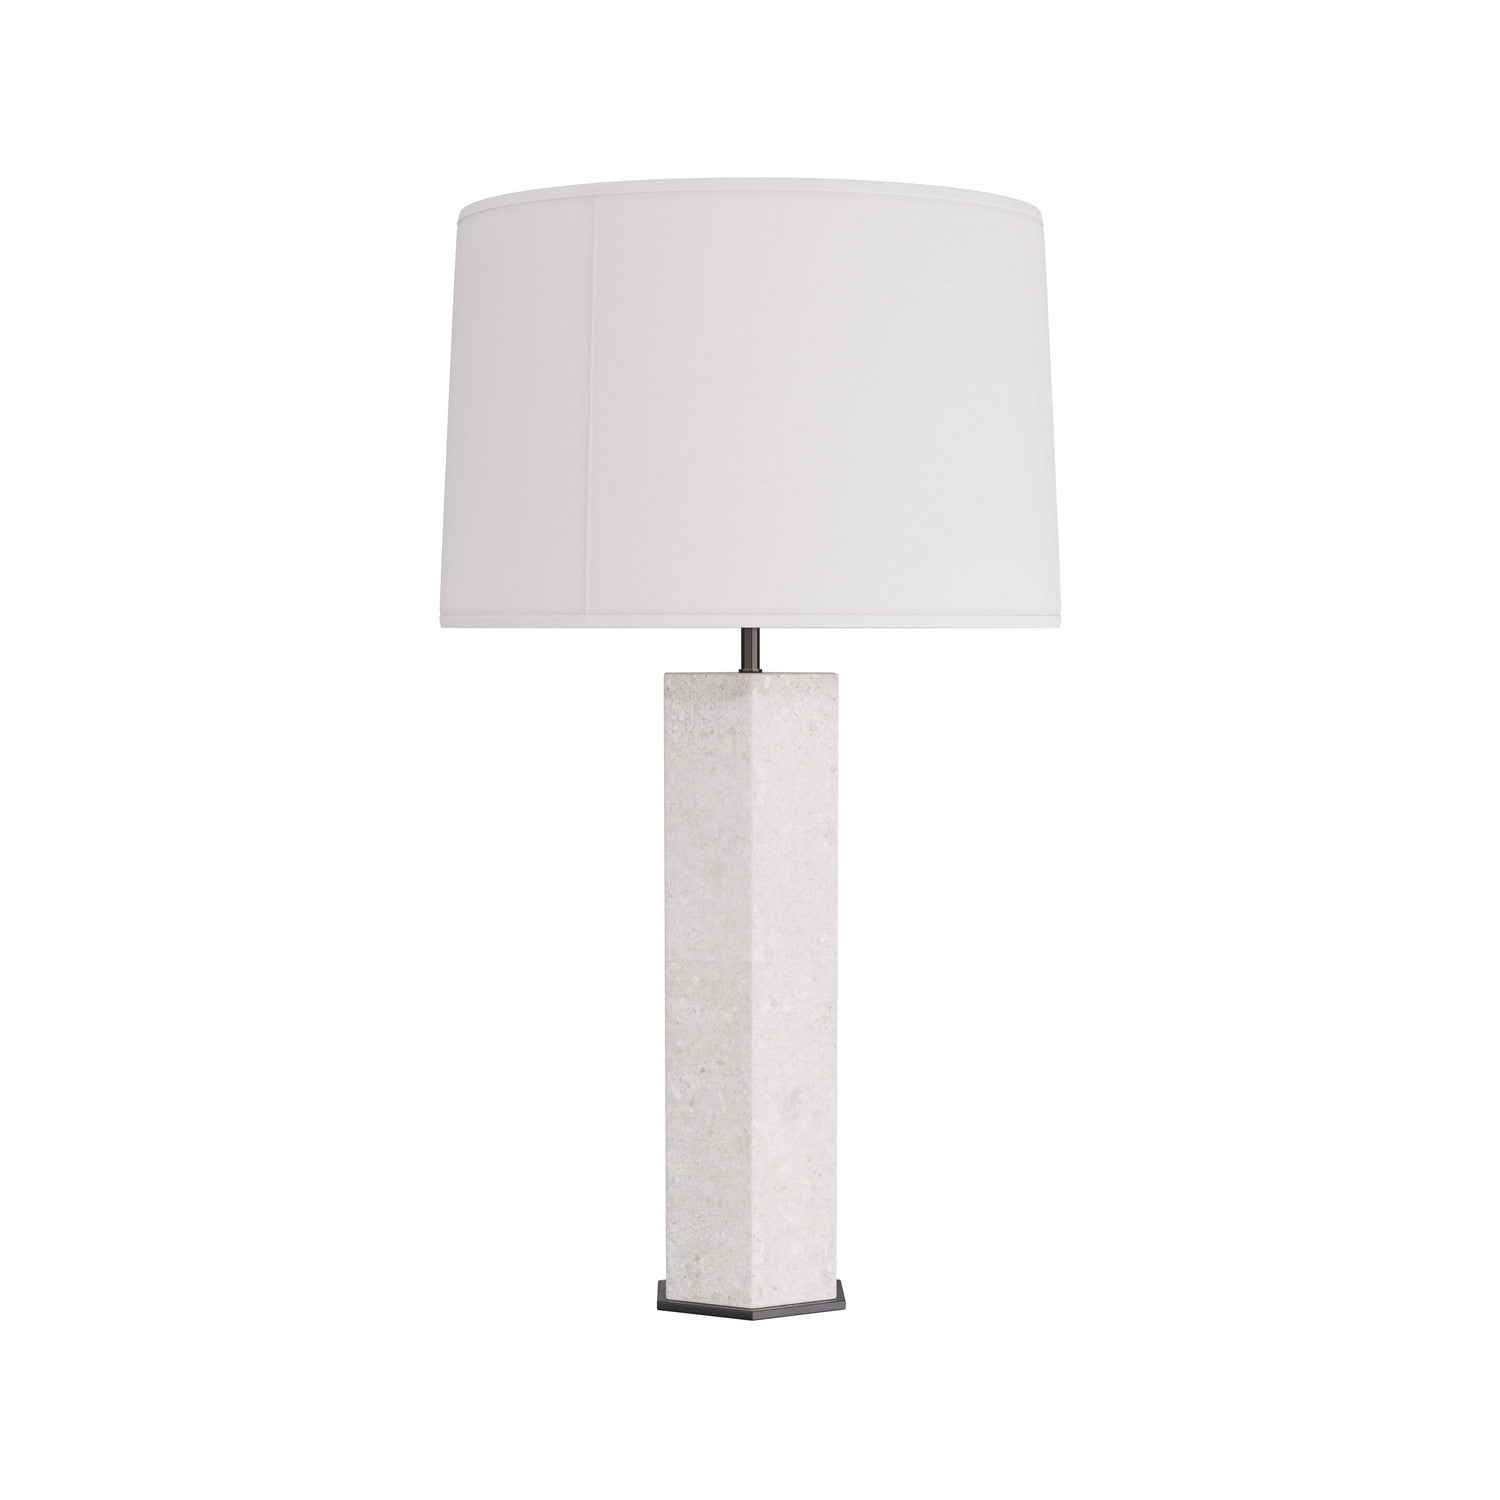 One Light Table Lamp from the Vesanto collection in Ivory finish